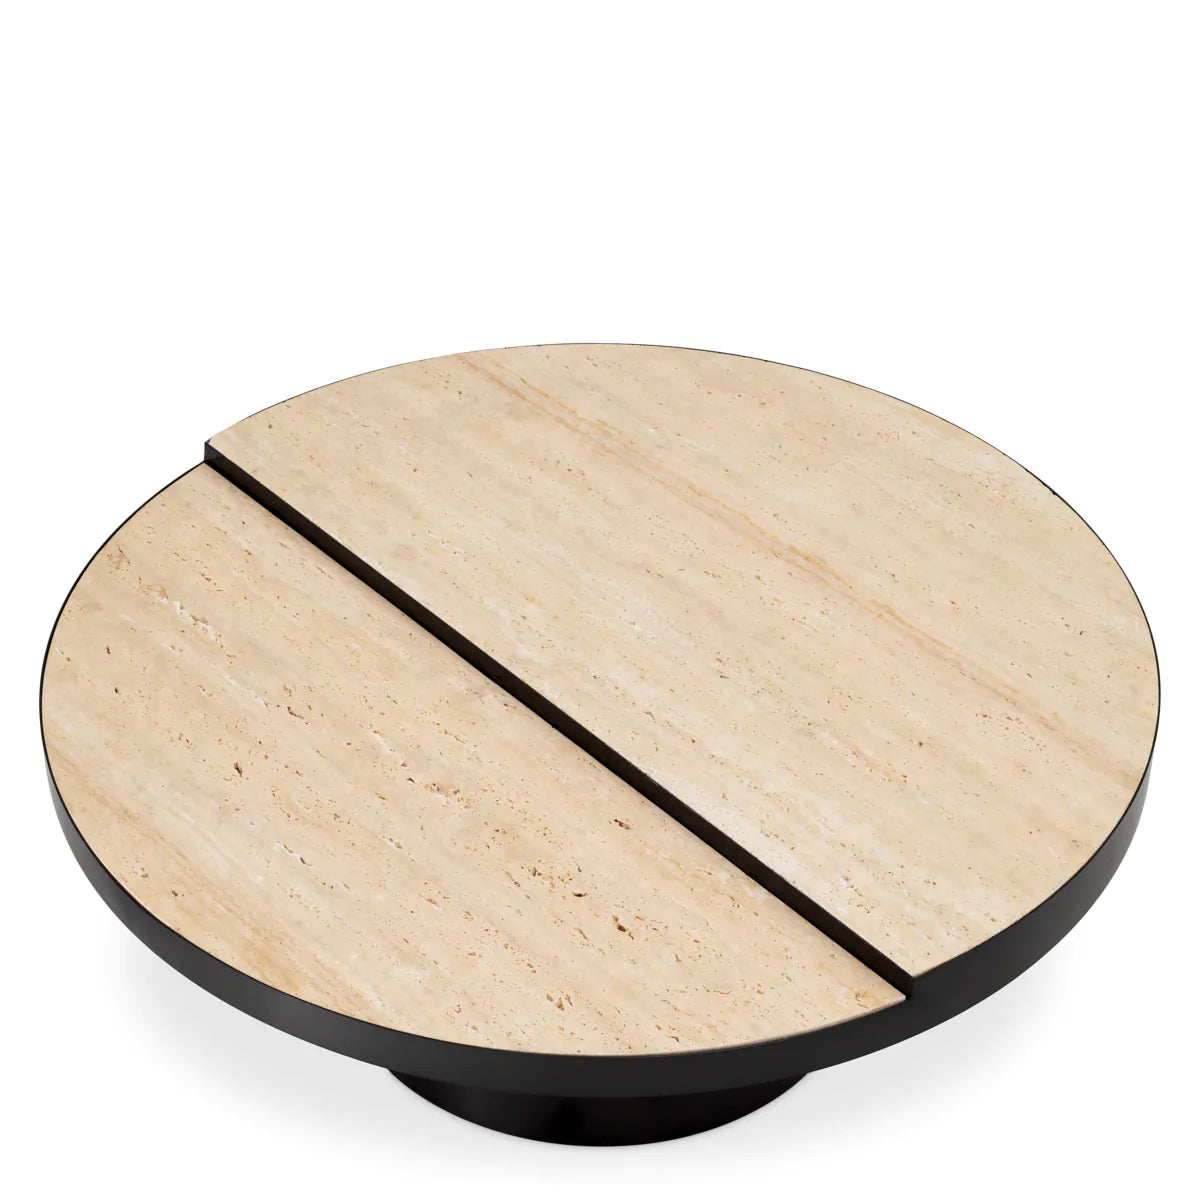 Excelsior Coffee Table - THAT COOL LIVING